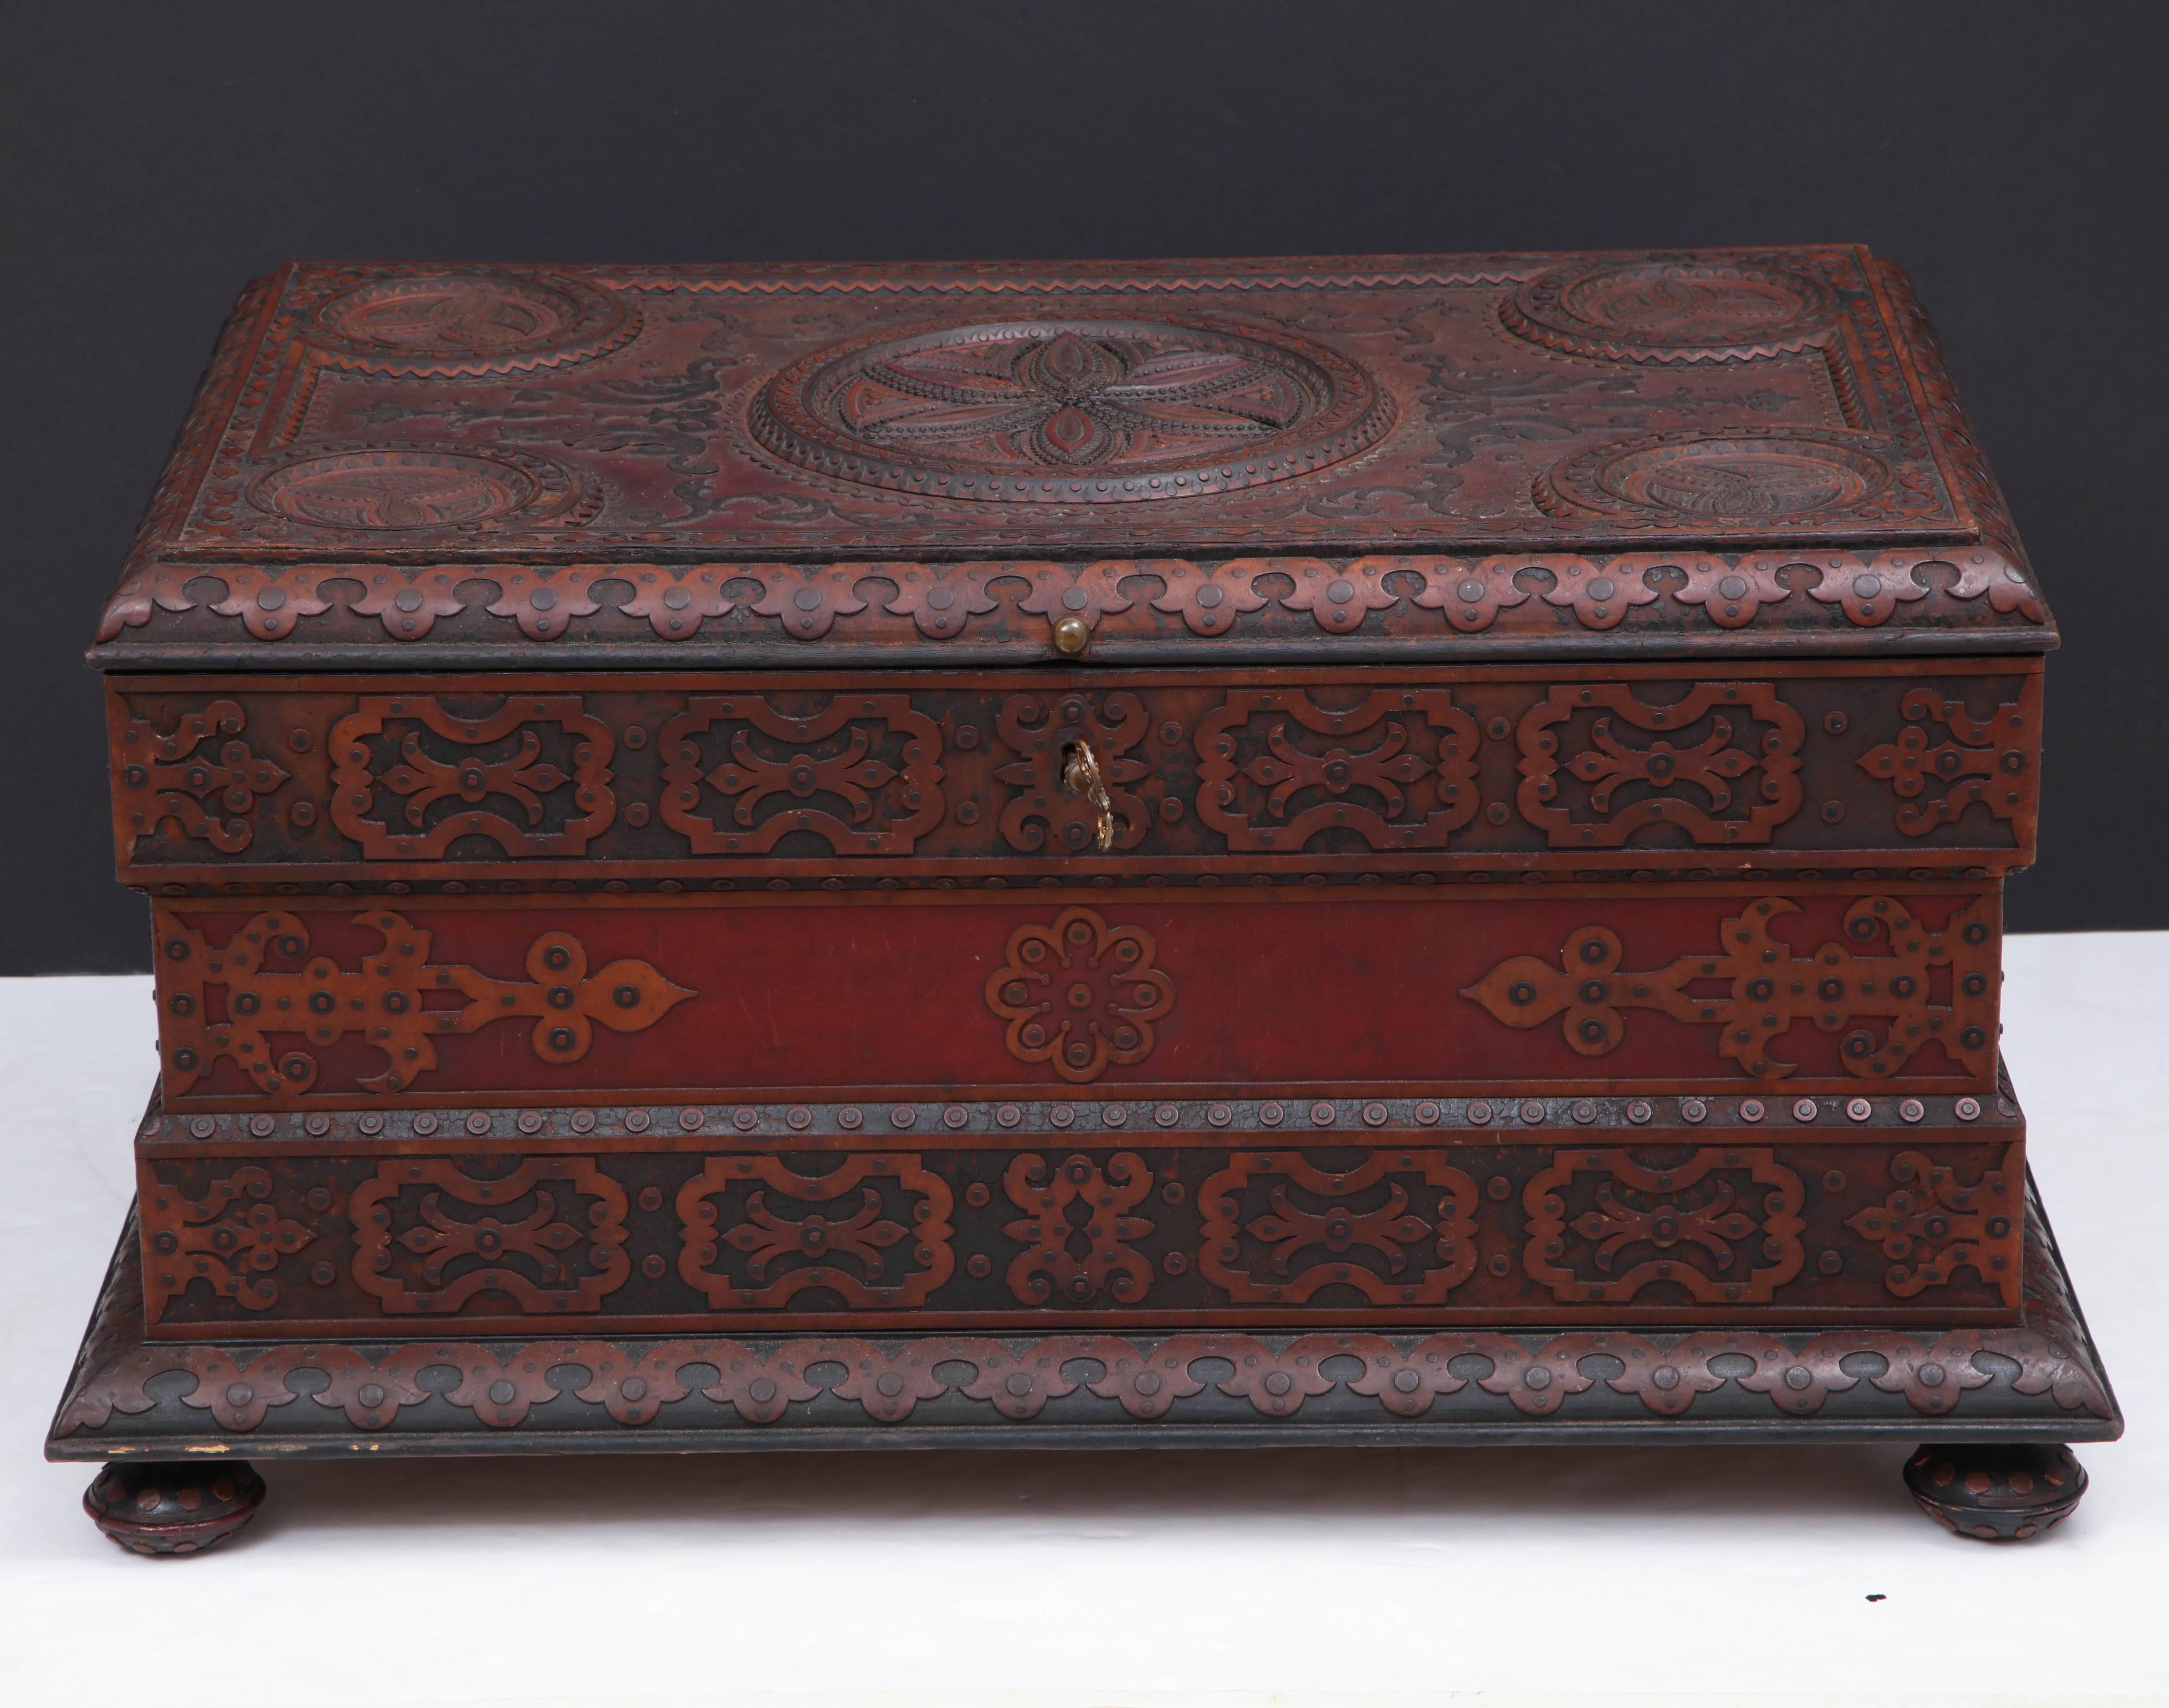 A spectacular and large tramp art blanket box, circa 1890-1910, constructed with layered leather, embossed and carved contrasting leather and wood. This box was found in Sweden but could possibly be of North German decent. It is unusual to find this